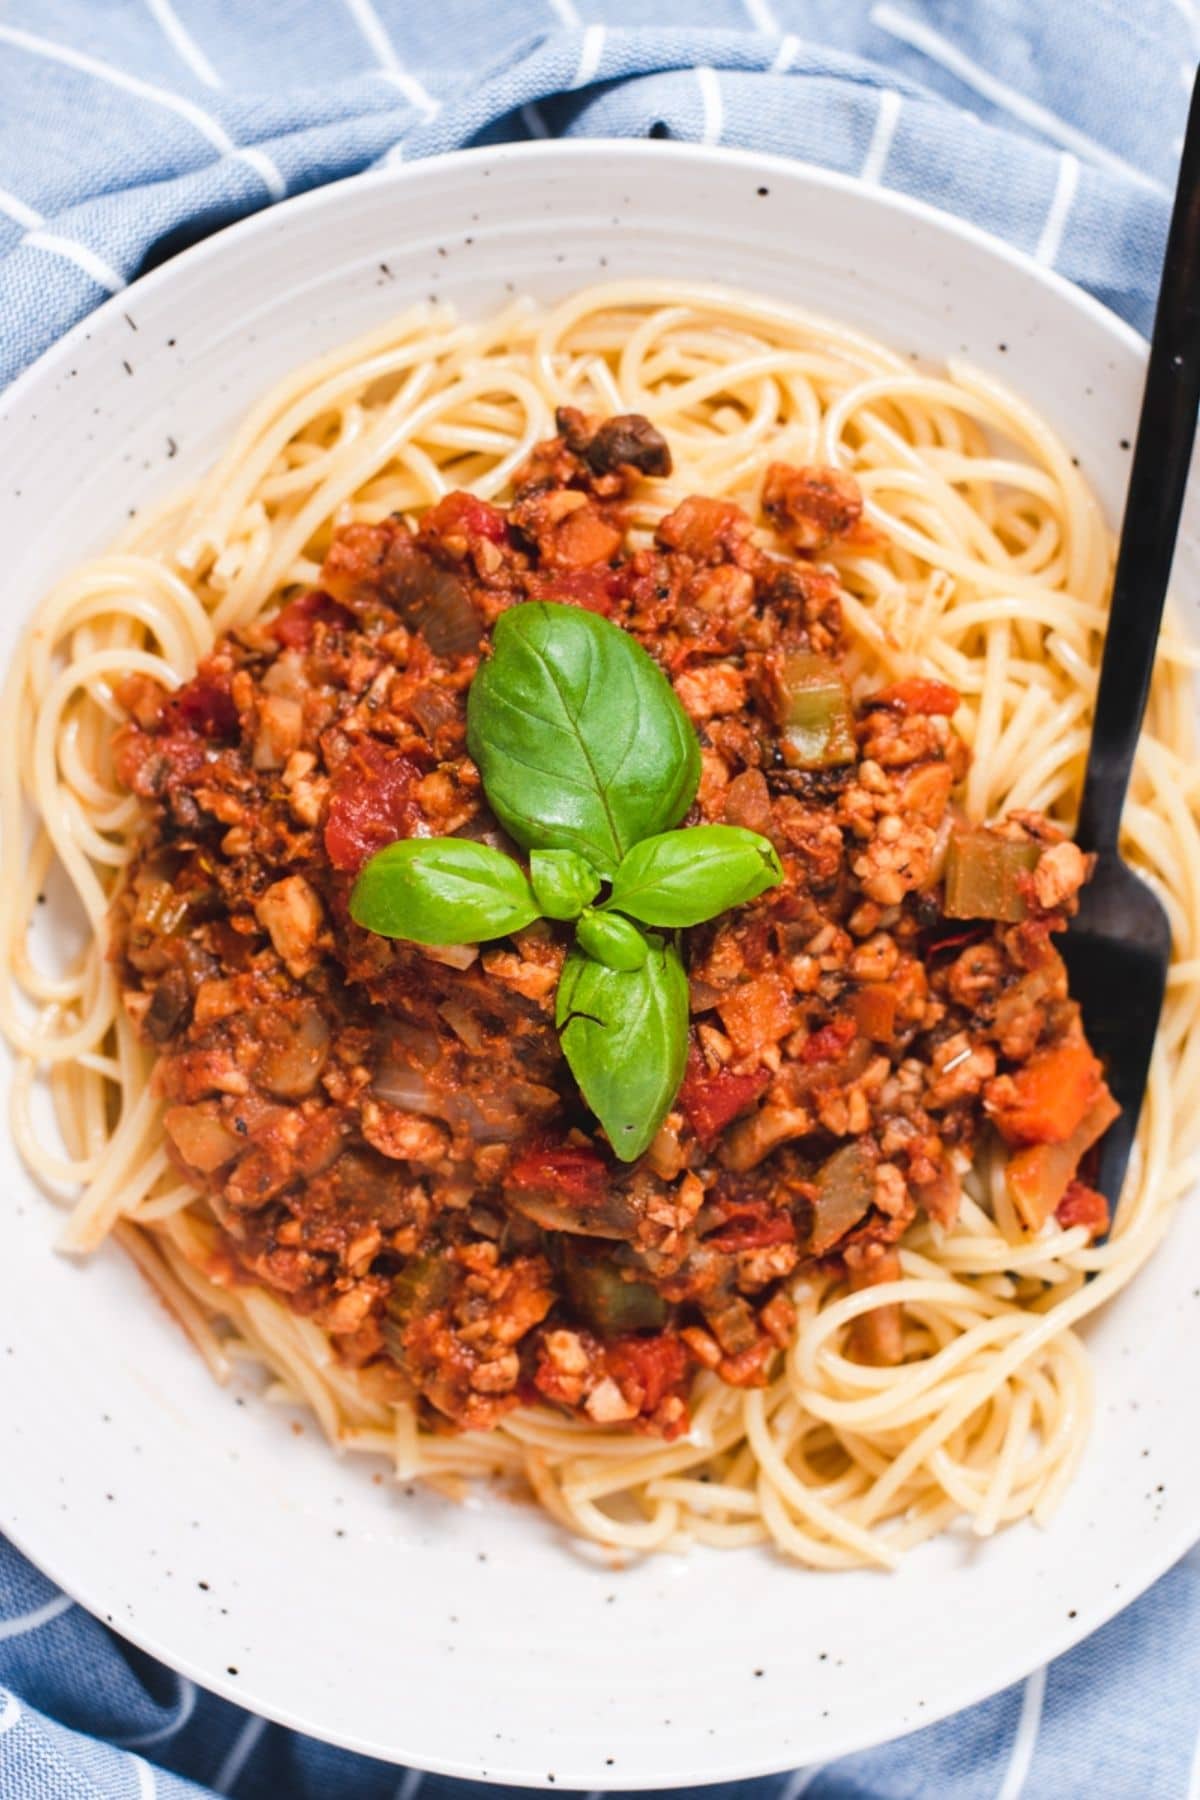 Large serving of spaghetti topped with Bolognese sauce and fresh basil.